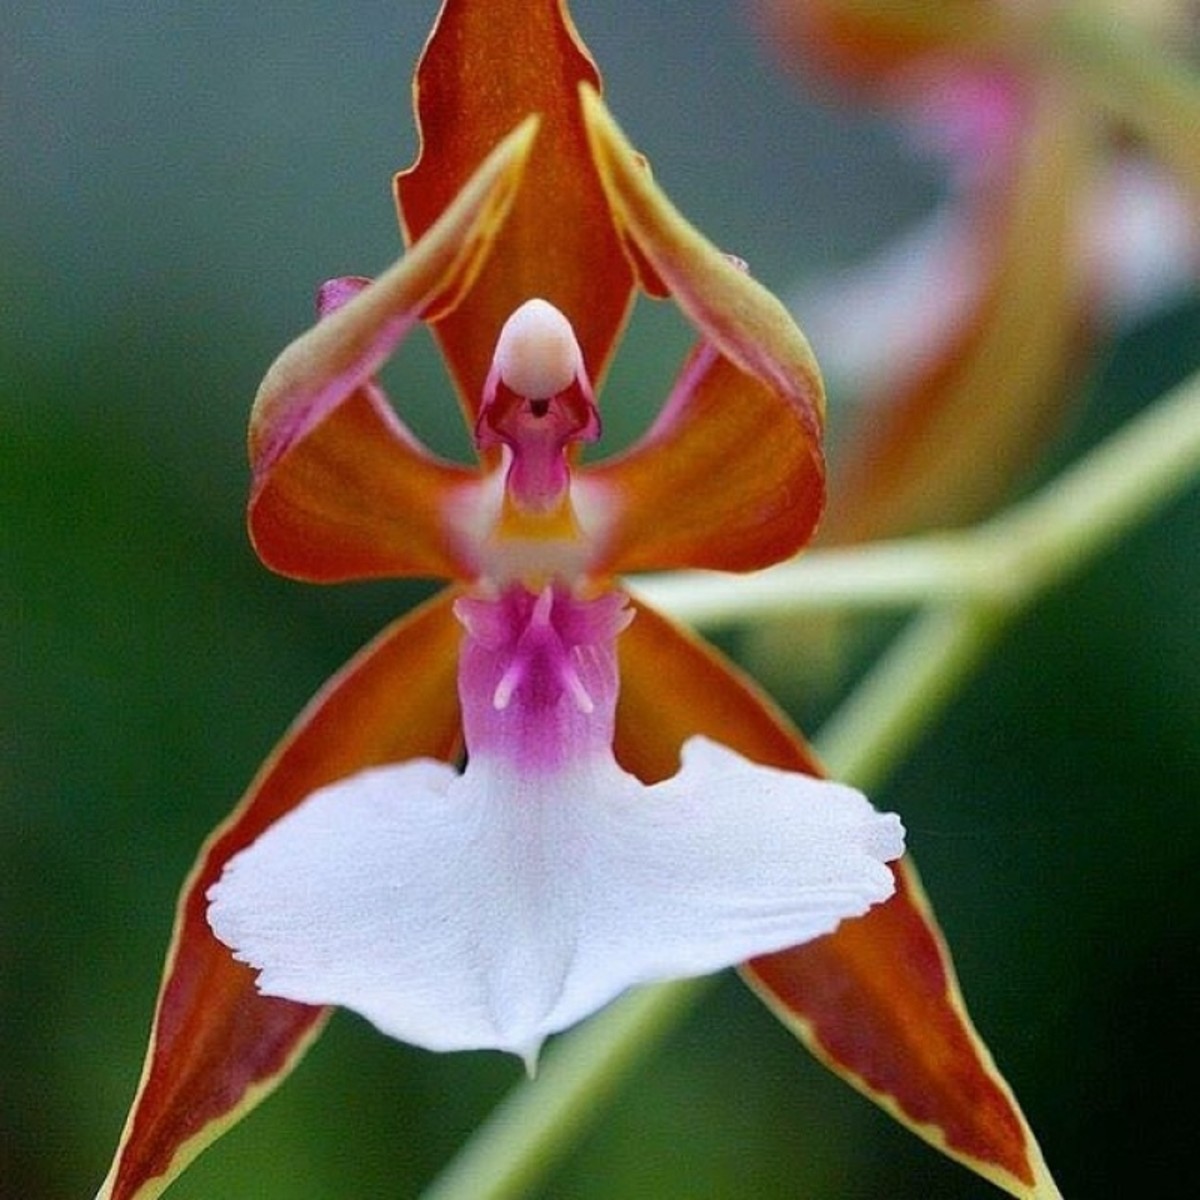 Unfortunately, these beautiful ballerina orchids are critically endangered and are only found in limited supply in Western Australia.